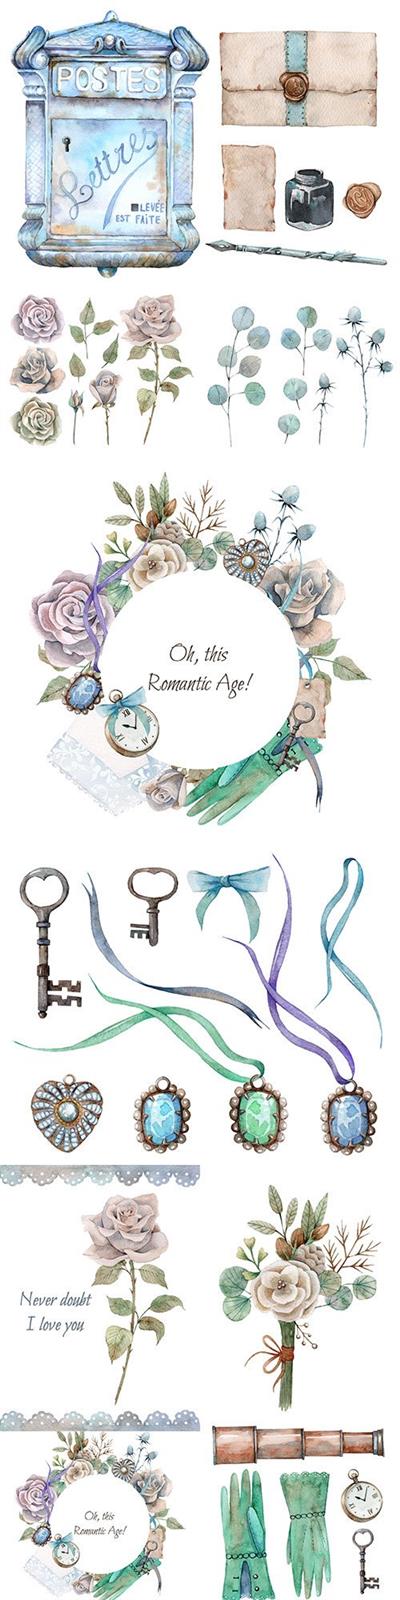 Flowers, decorations and ancient keys watercolor design